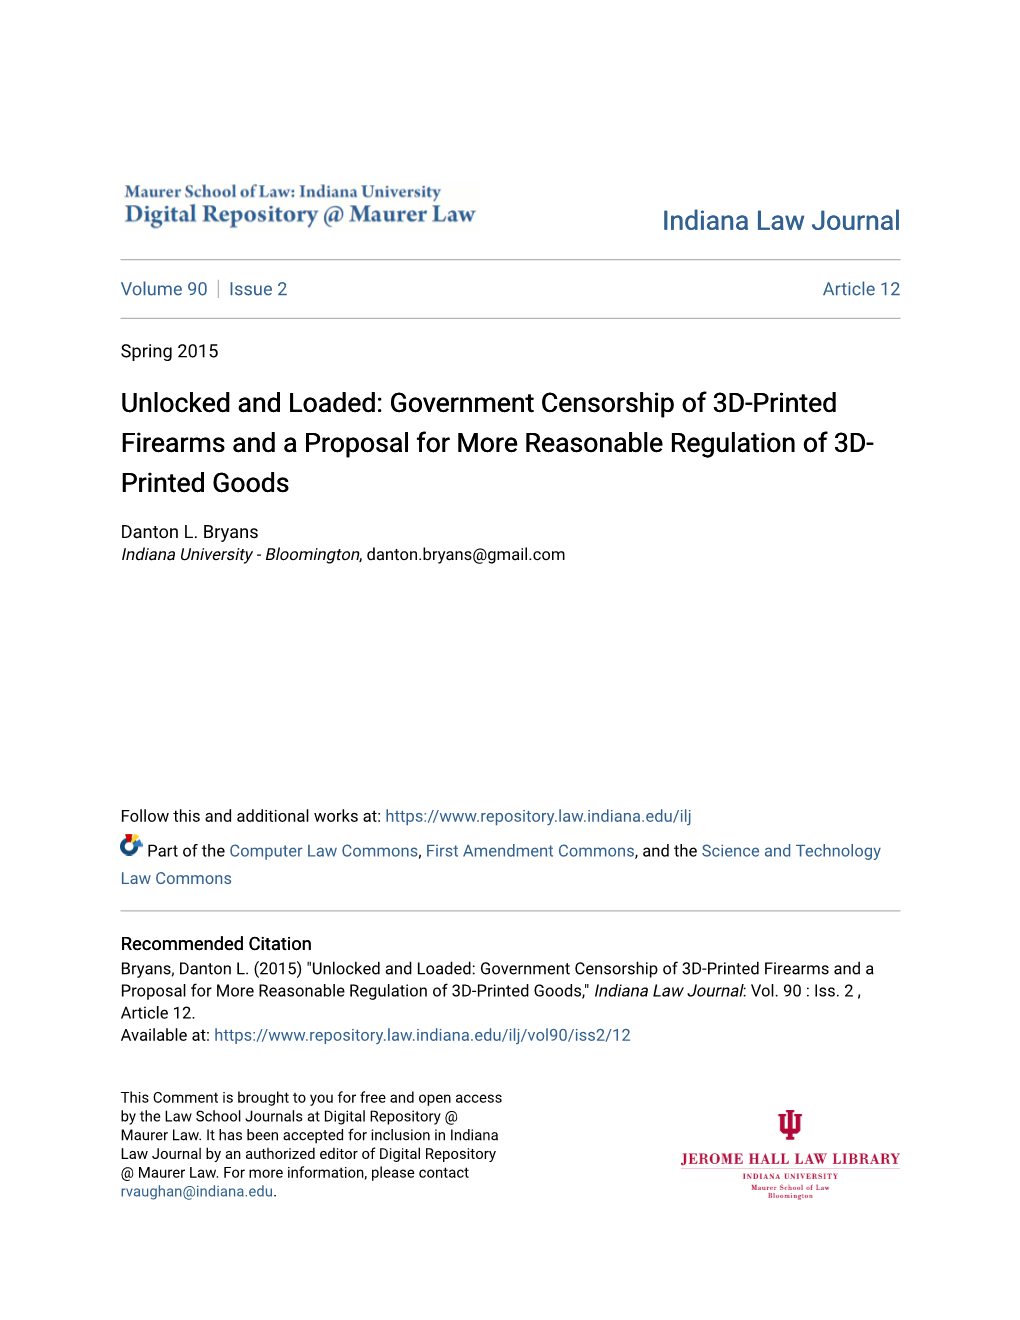 Government Censorship of 3D-Printed Firearms and a Proposal for More Reasonable Regulation of 3D- Printed Goods